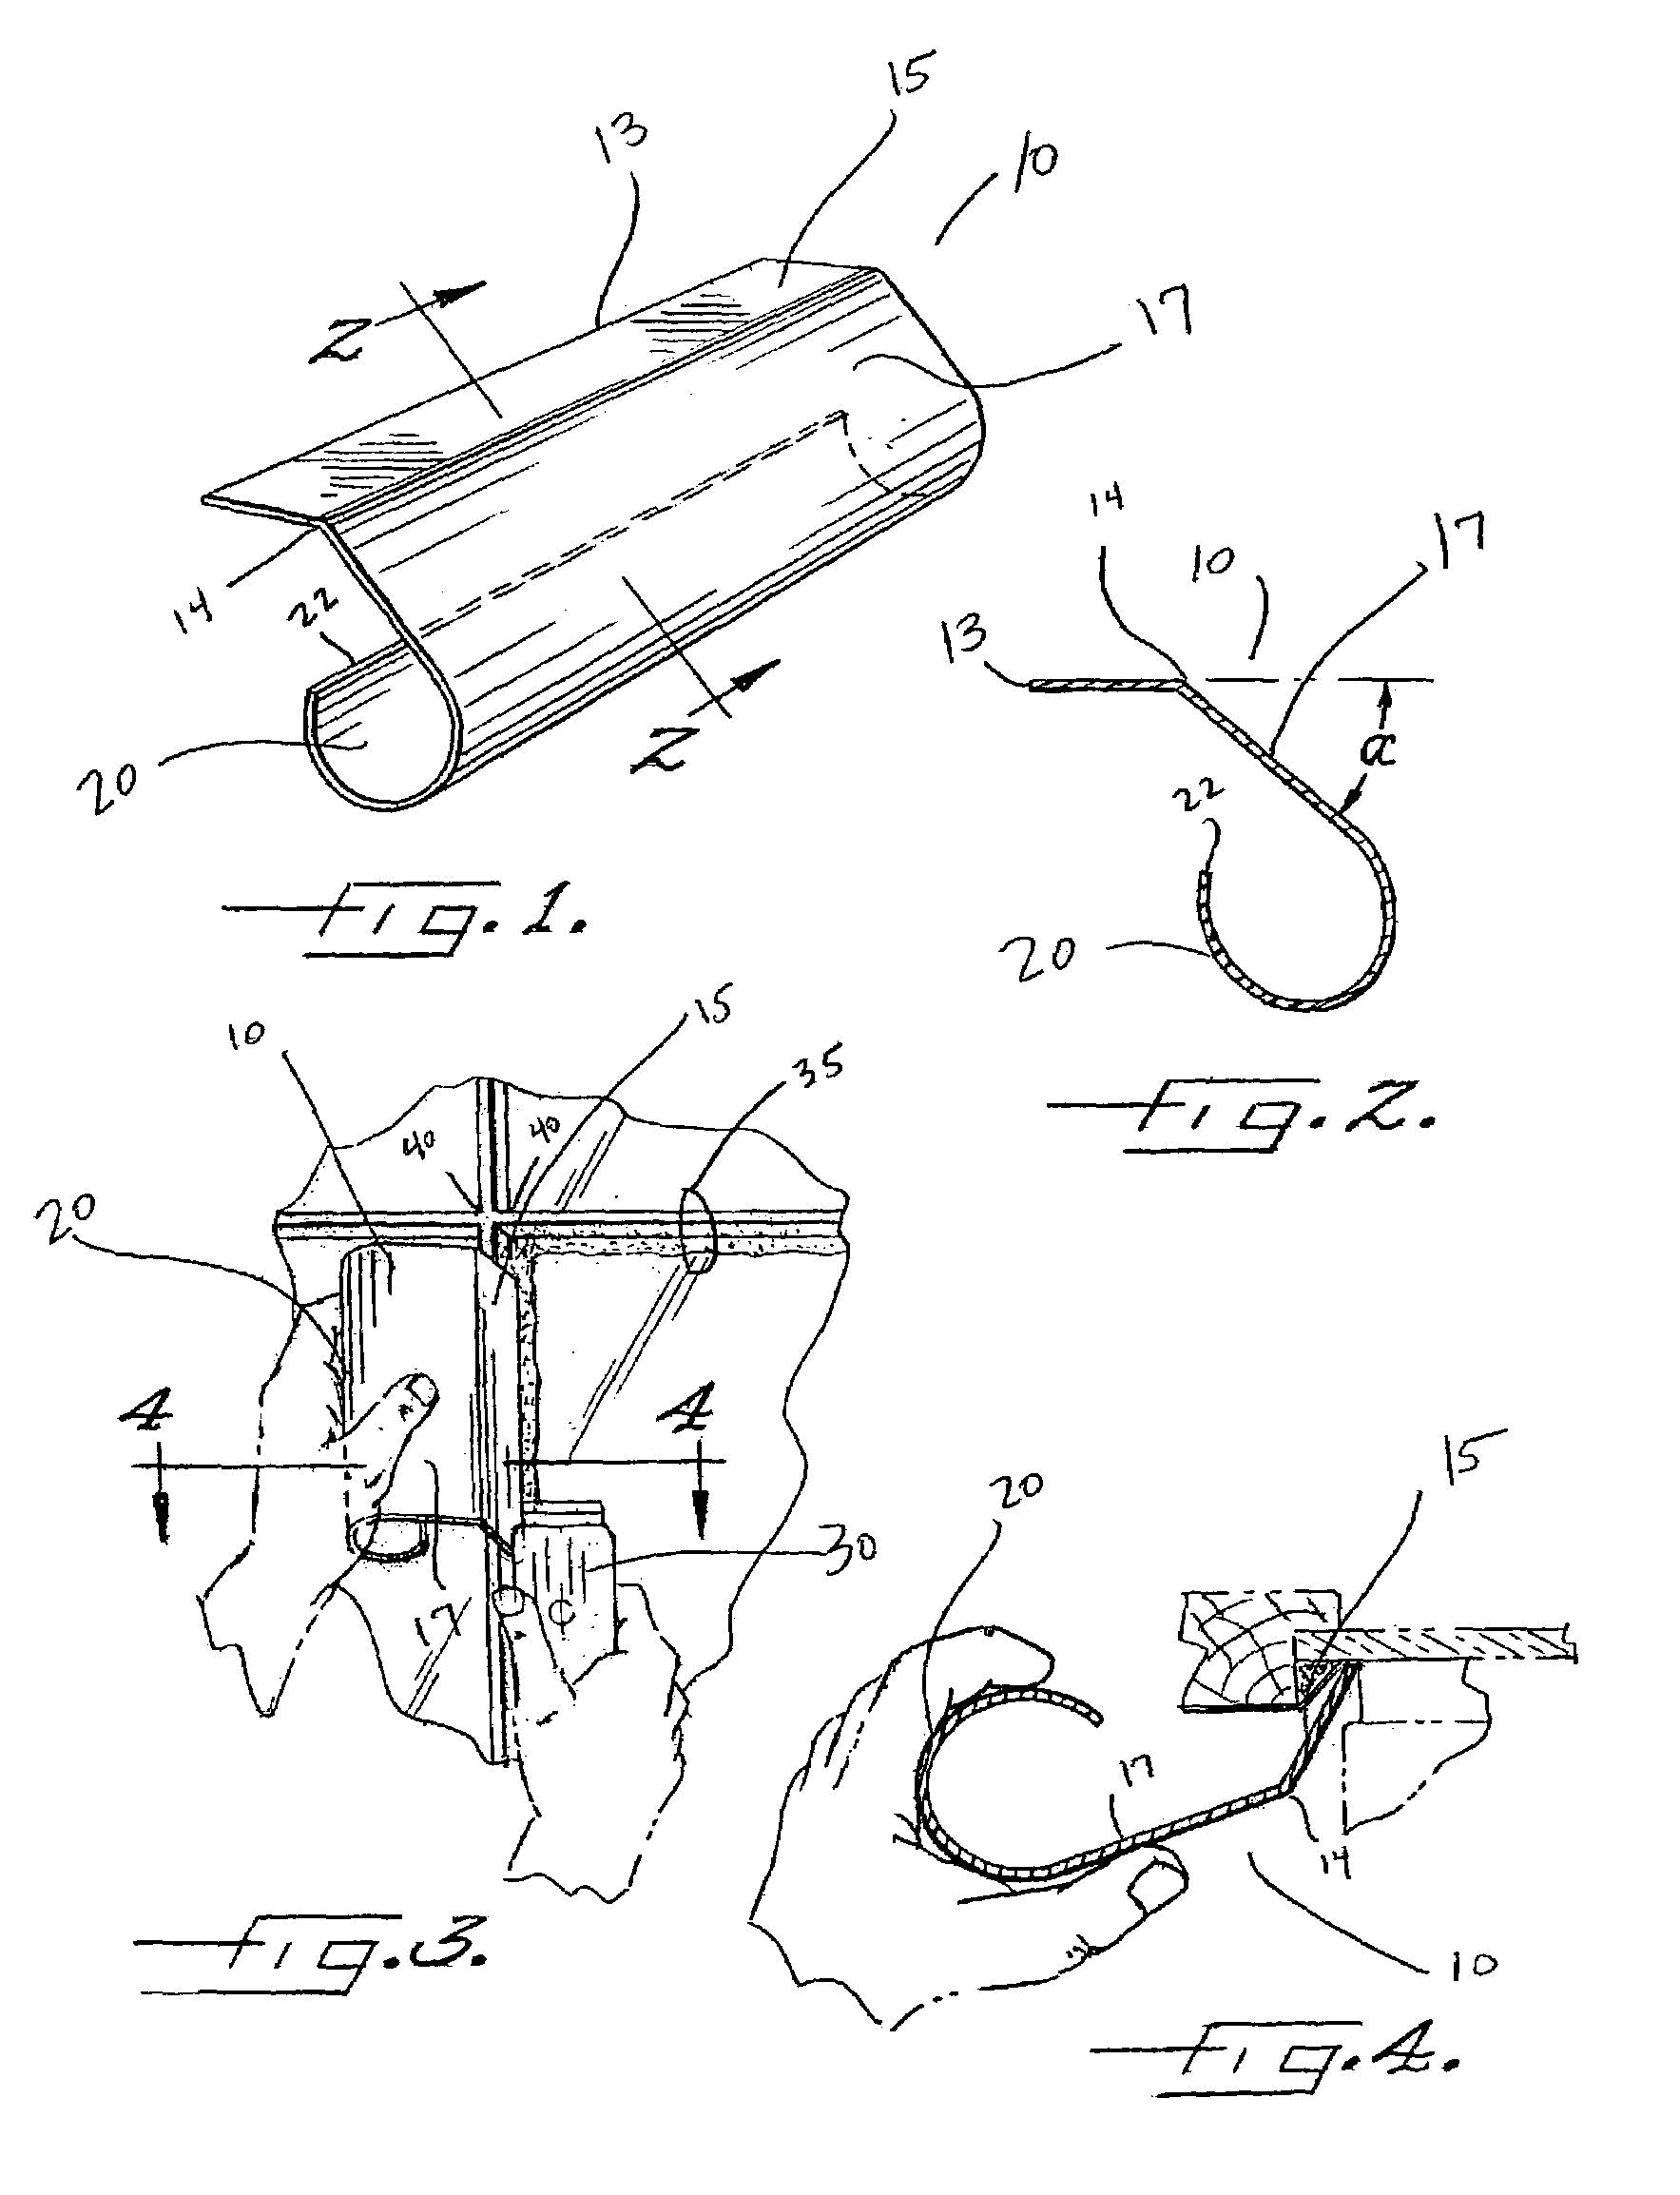 Ergonomic shielding tool for processing a surface